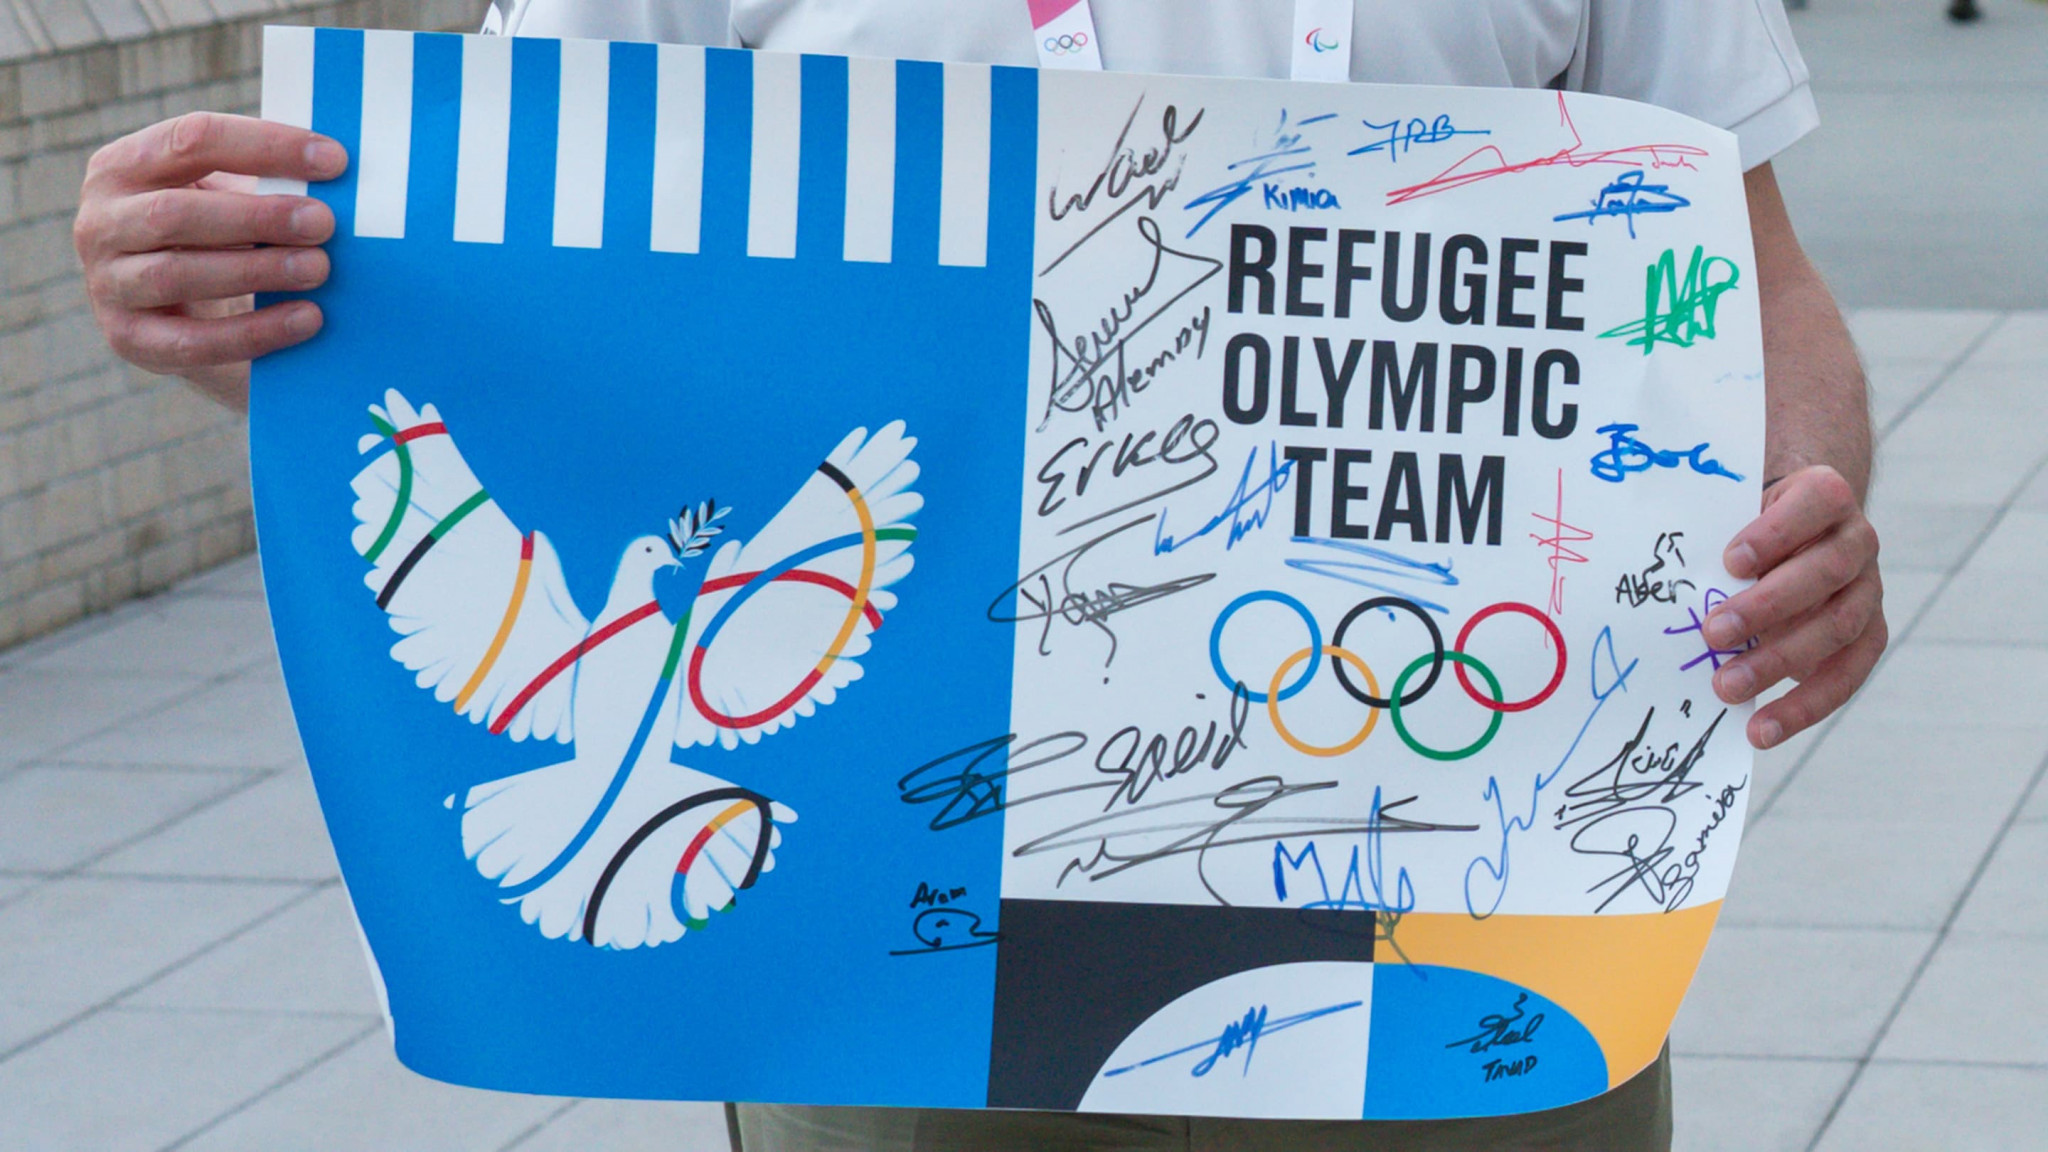  Eleven new athletes earn IOC scholarships to seek refugee team places at Paris 2024